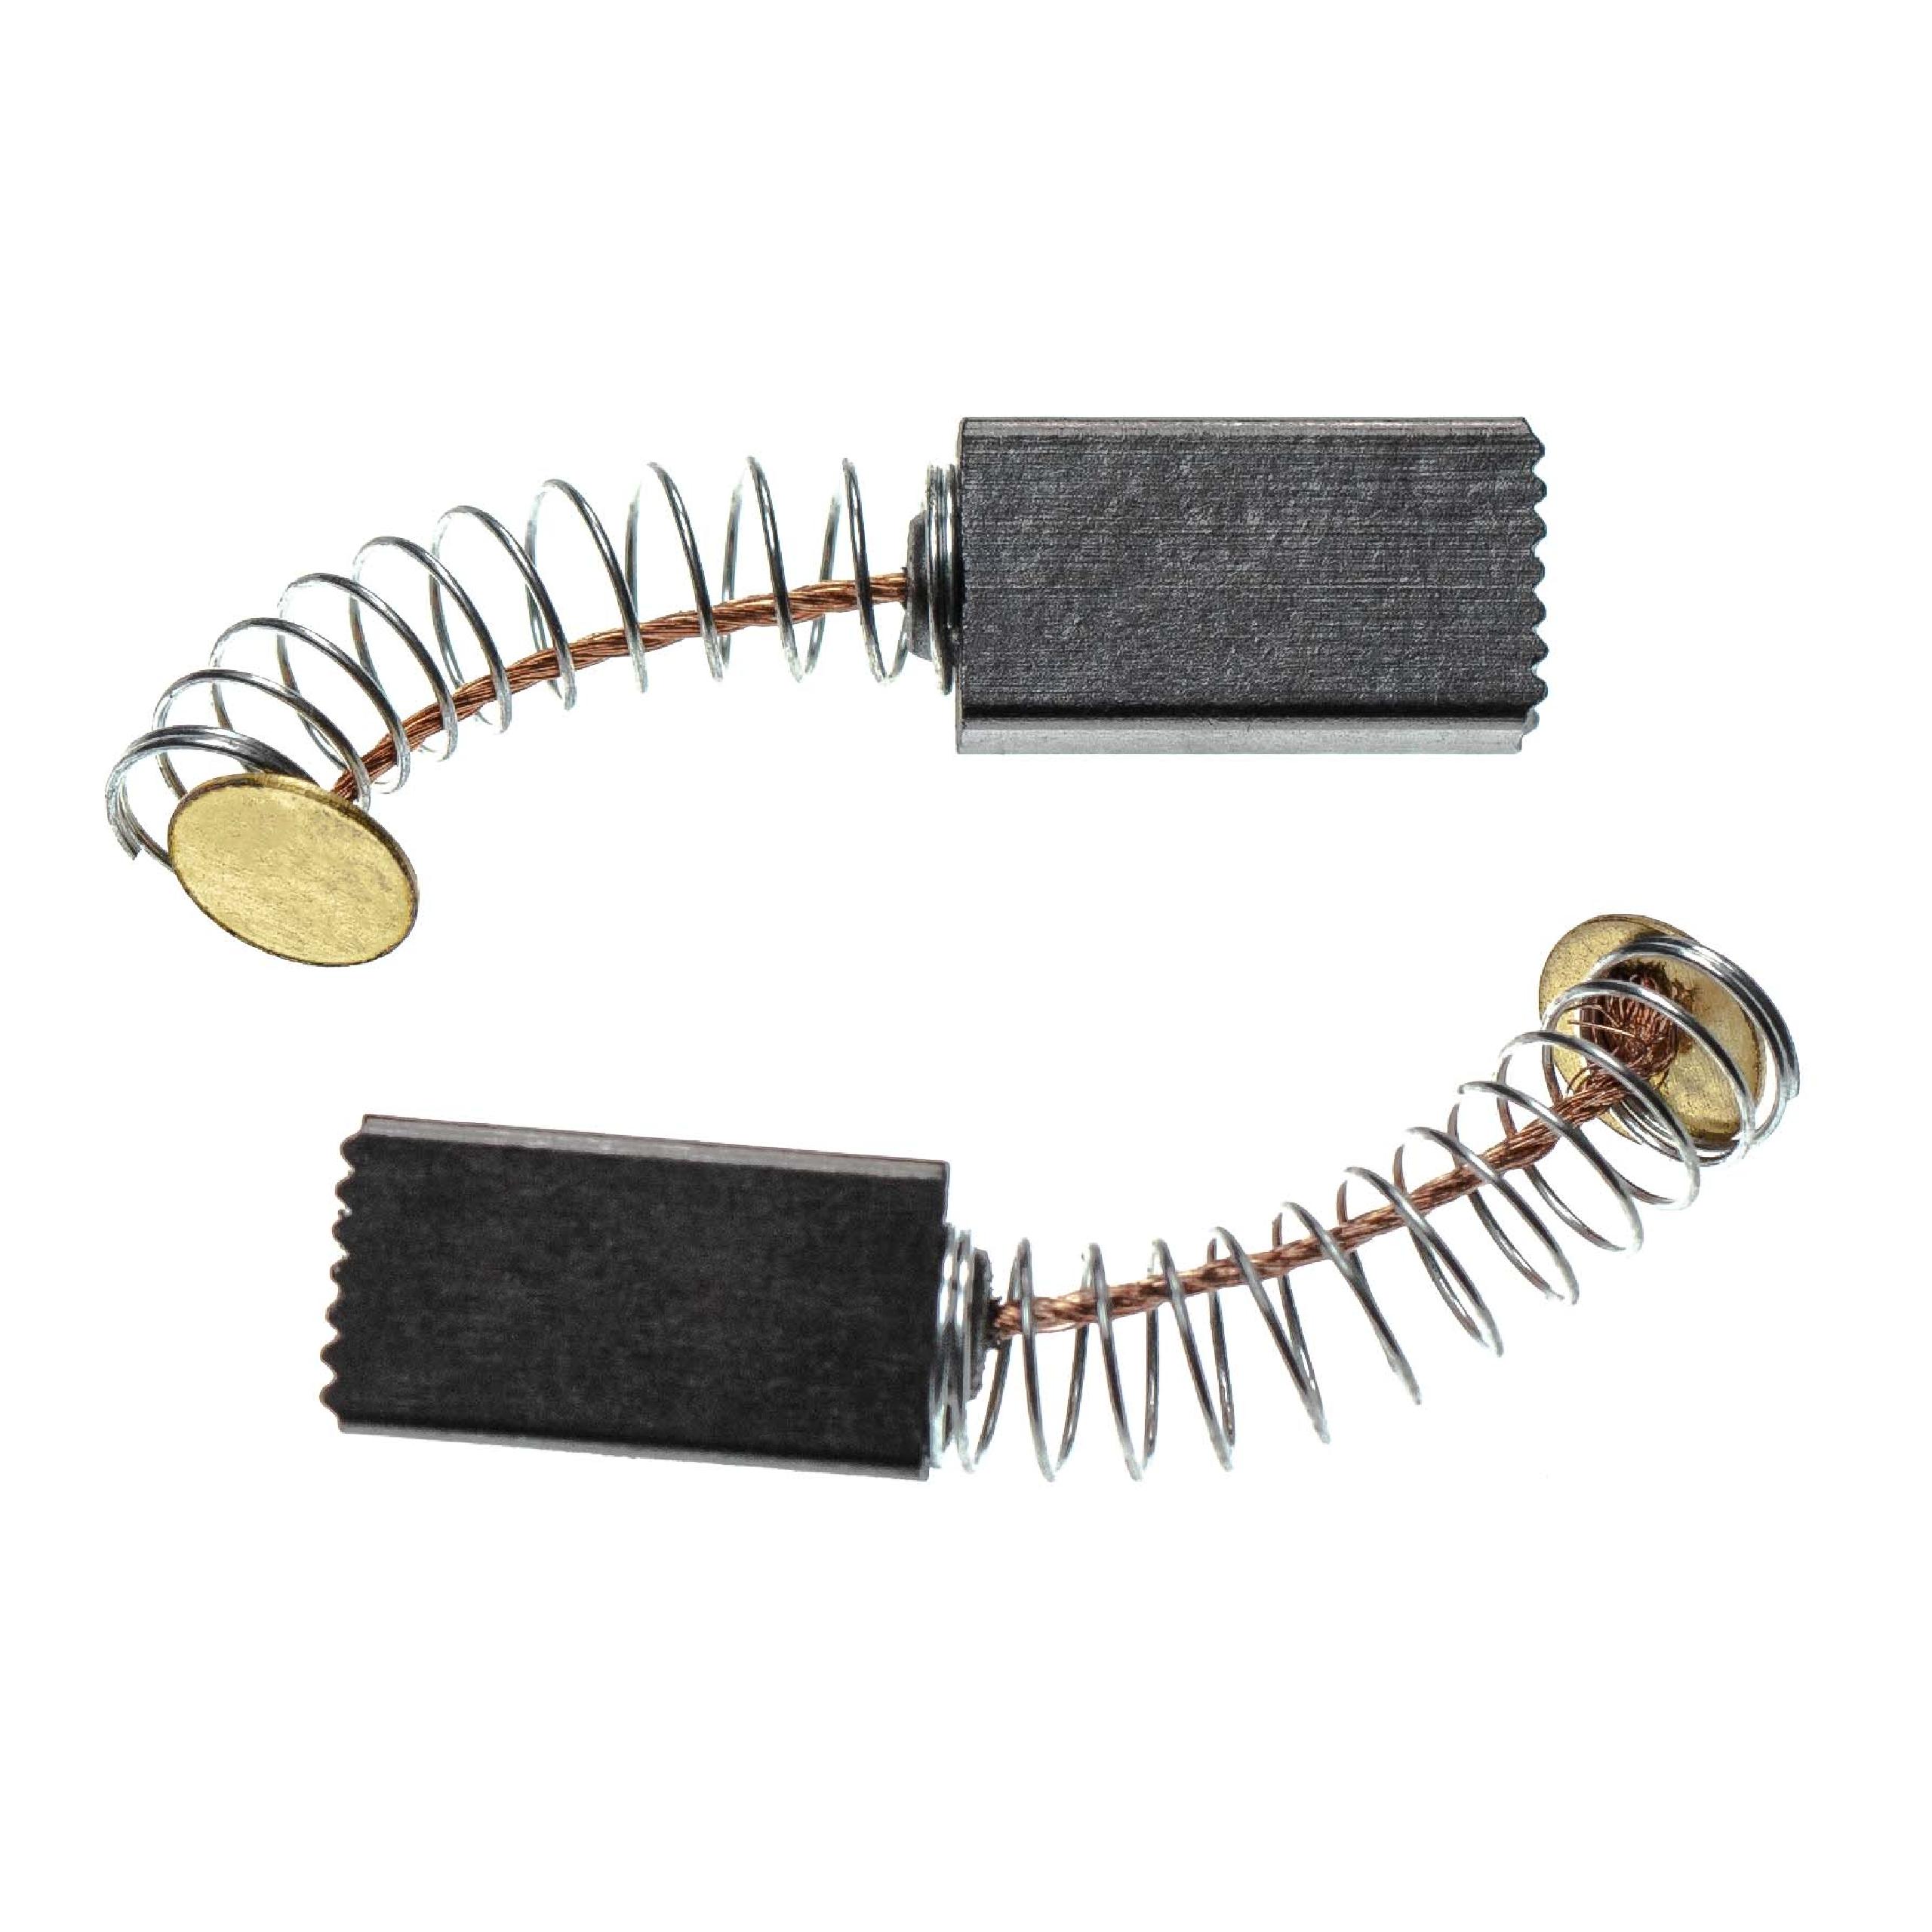 2x Carbon Brush 5x8x14.5 mm for for power tool